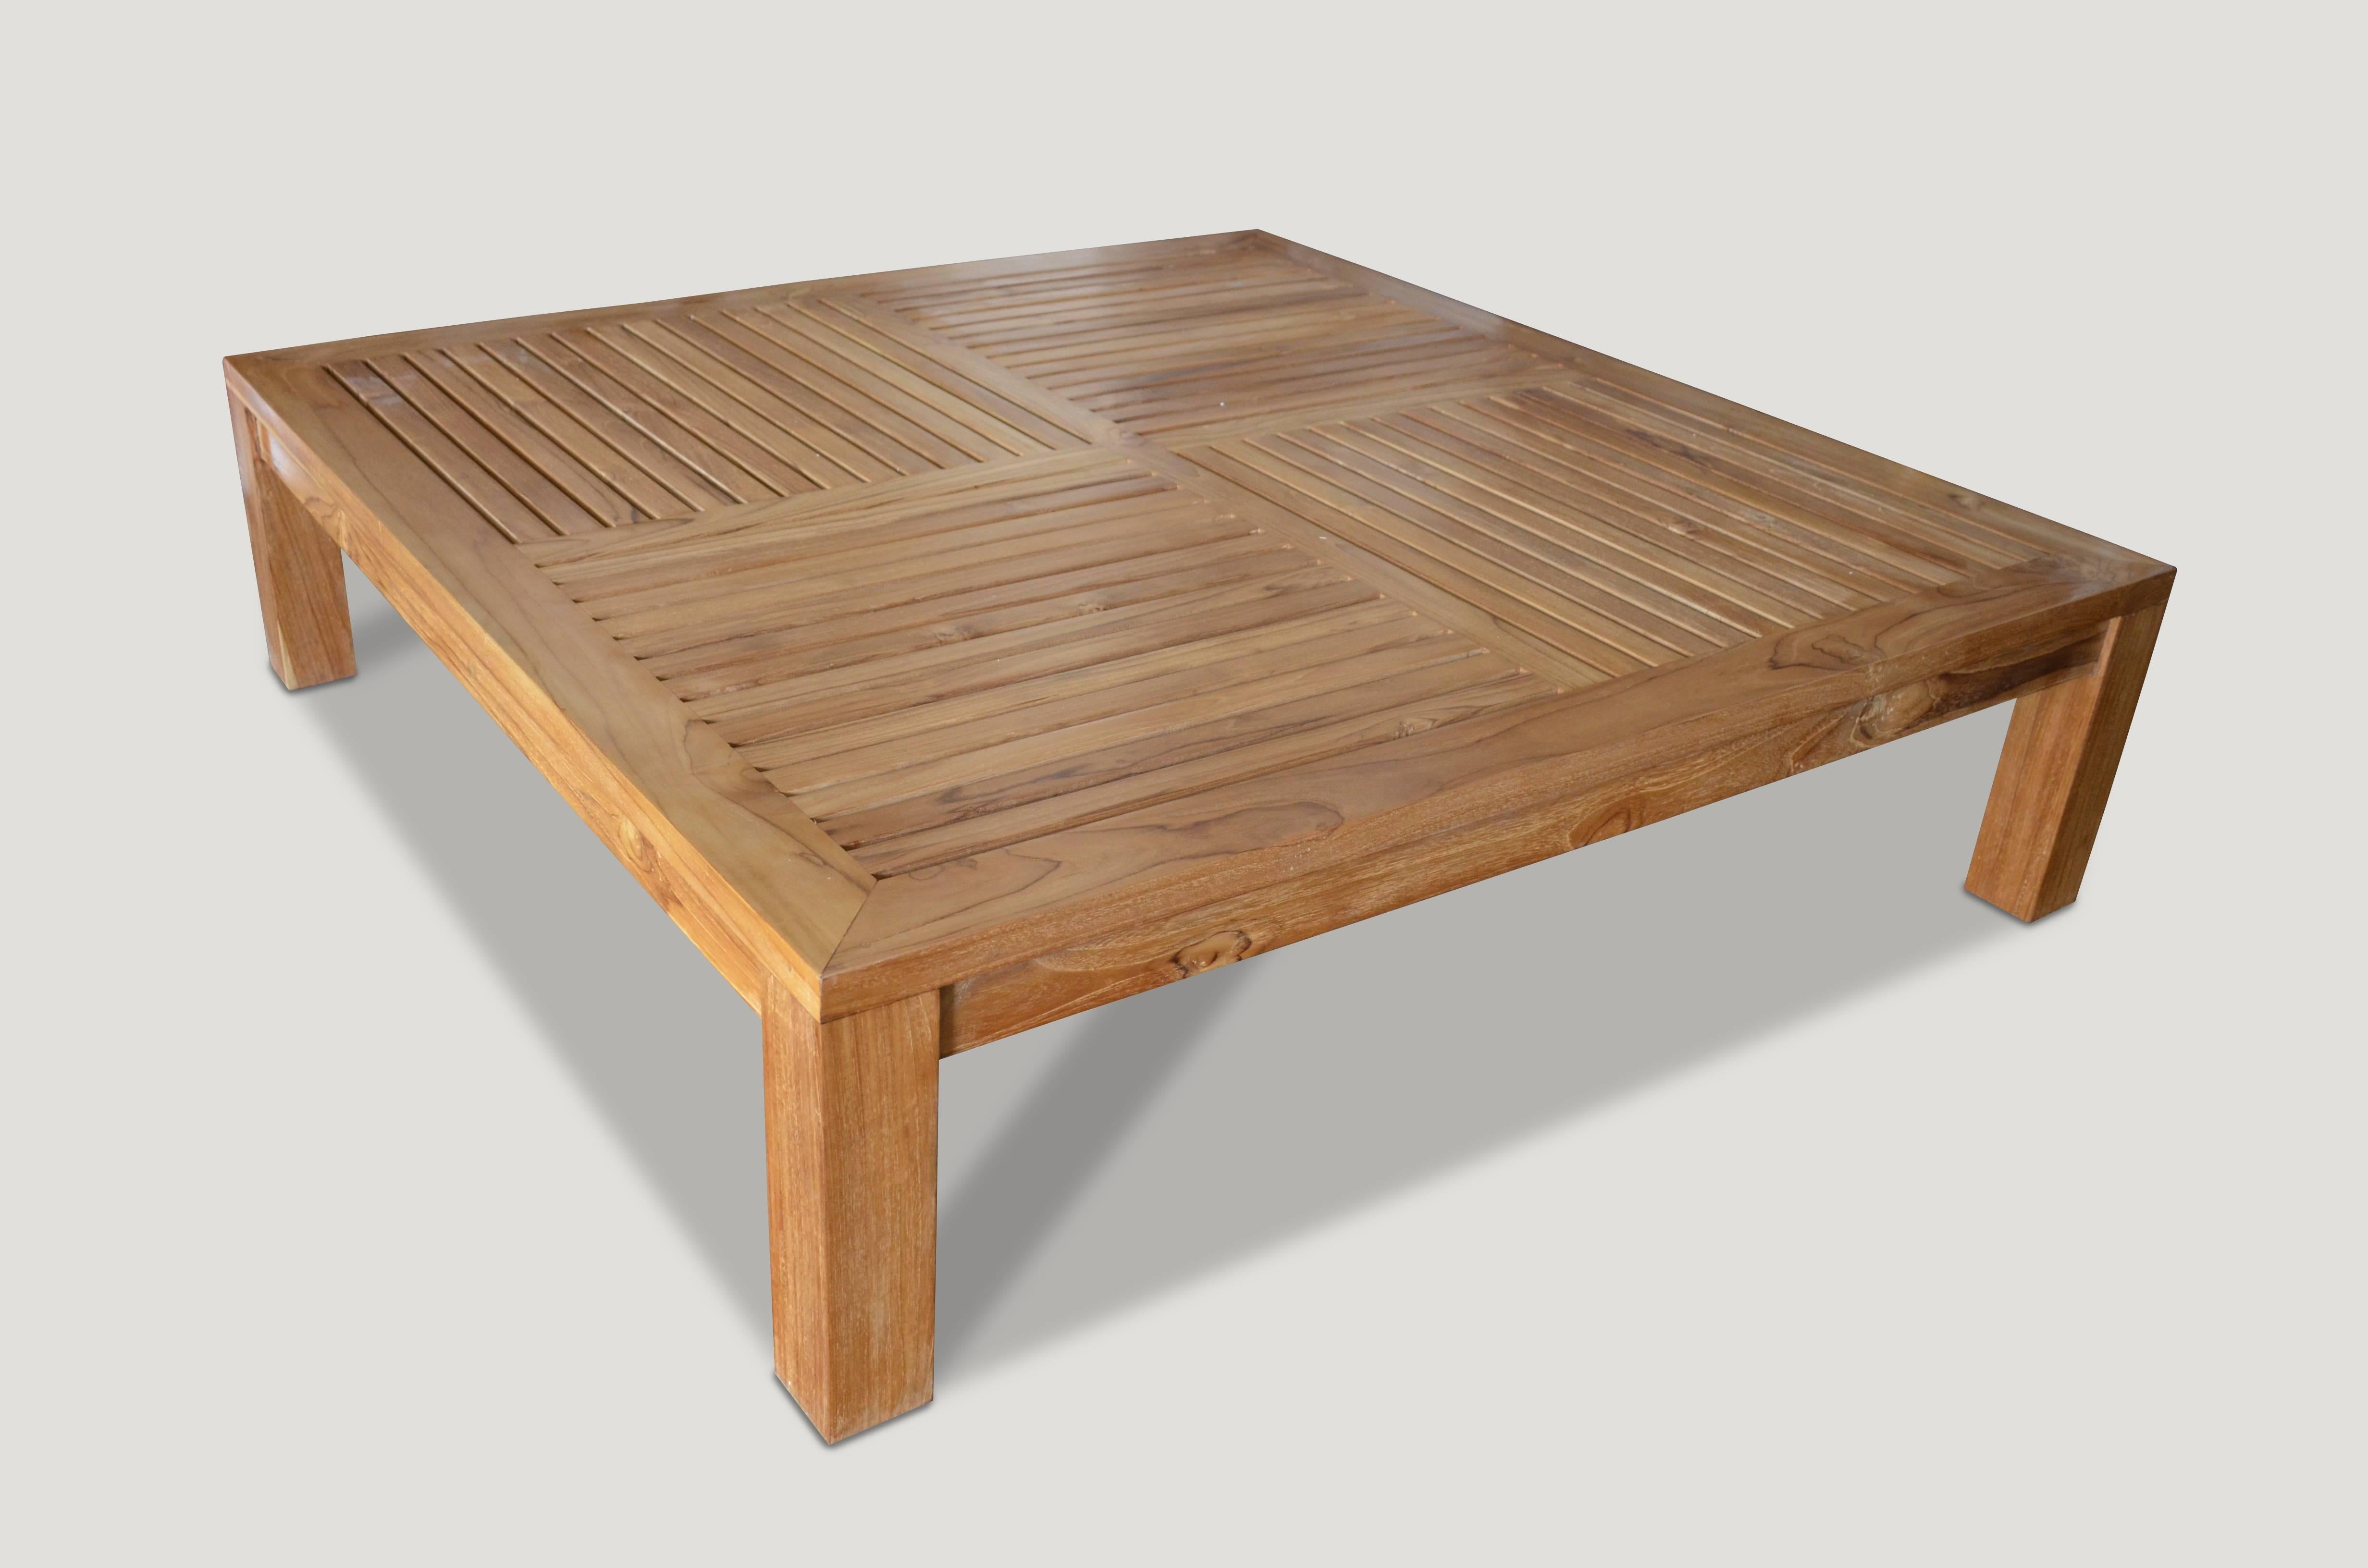 Solid teak wood framed, slatted top coffee table made from reclaimed teak with an oil finish to enhance the natural wood. Perfect for inside or outside living.

Andrianna Shamaris. The Leader In Modern Organic Design™
 